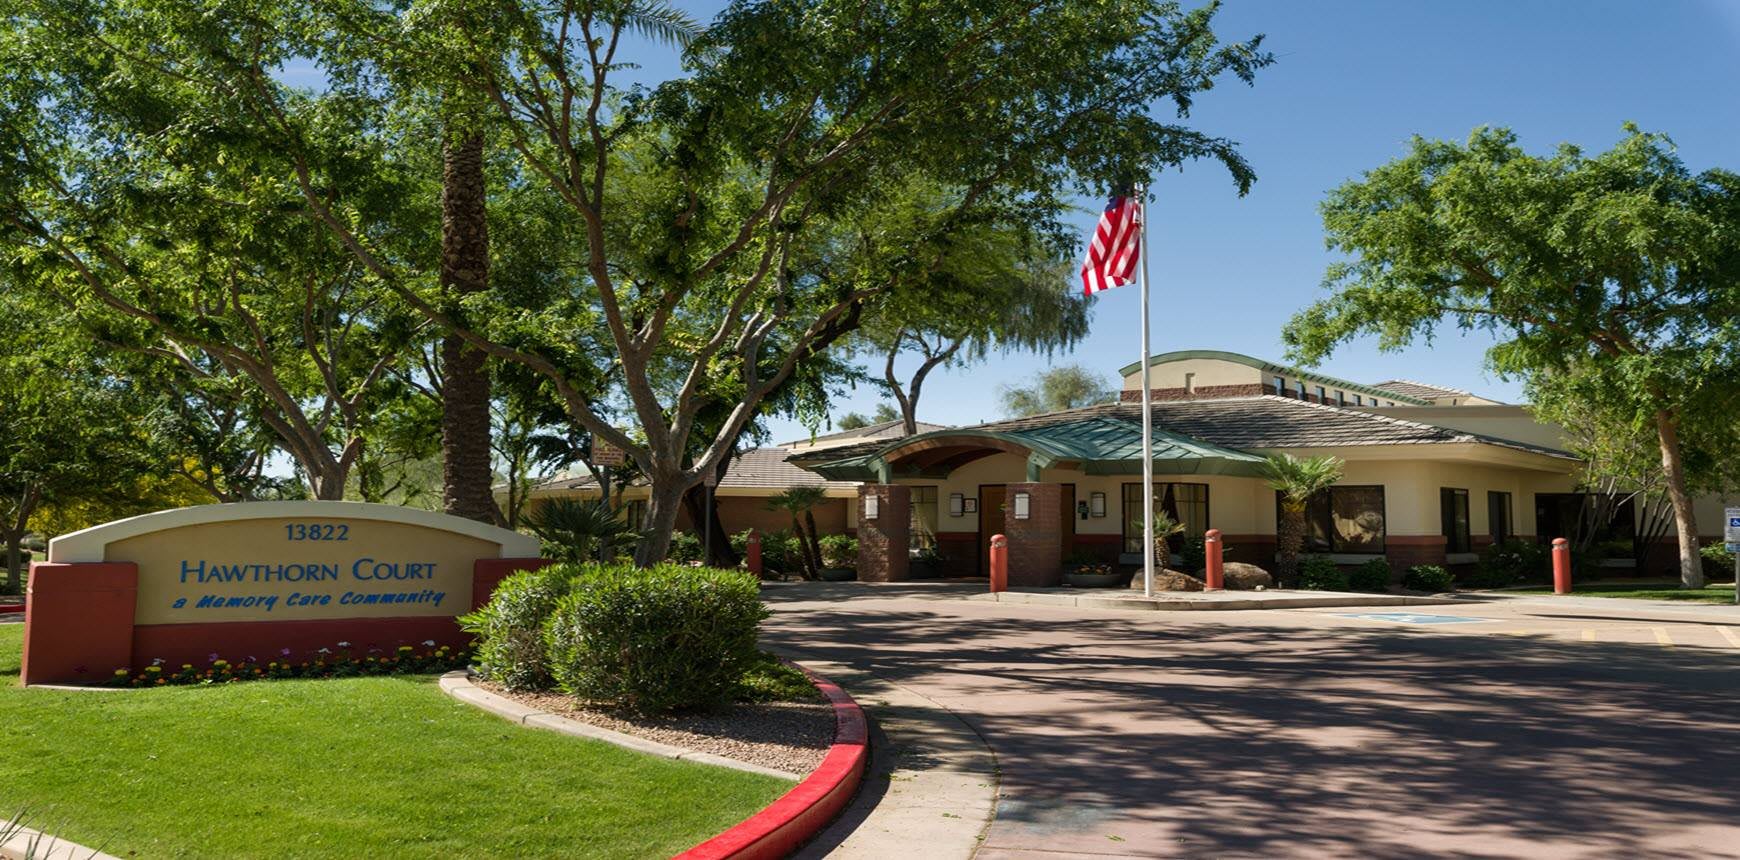 Hawthorn Court at Ahwatukee community exterior